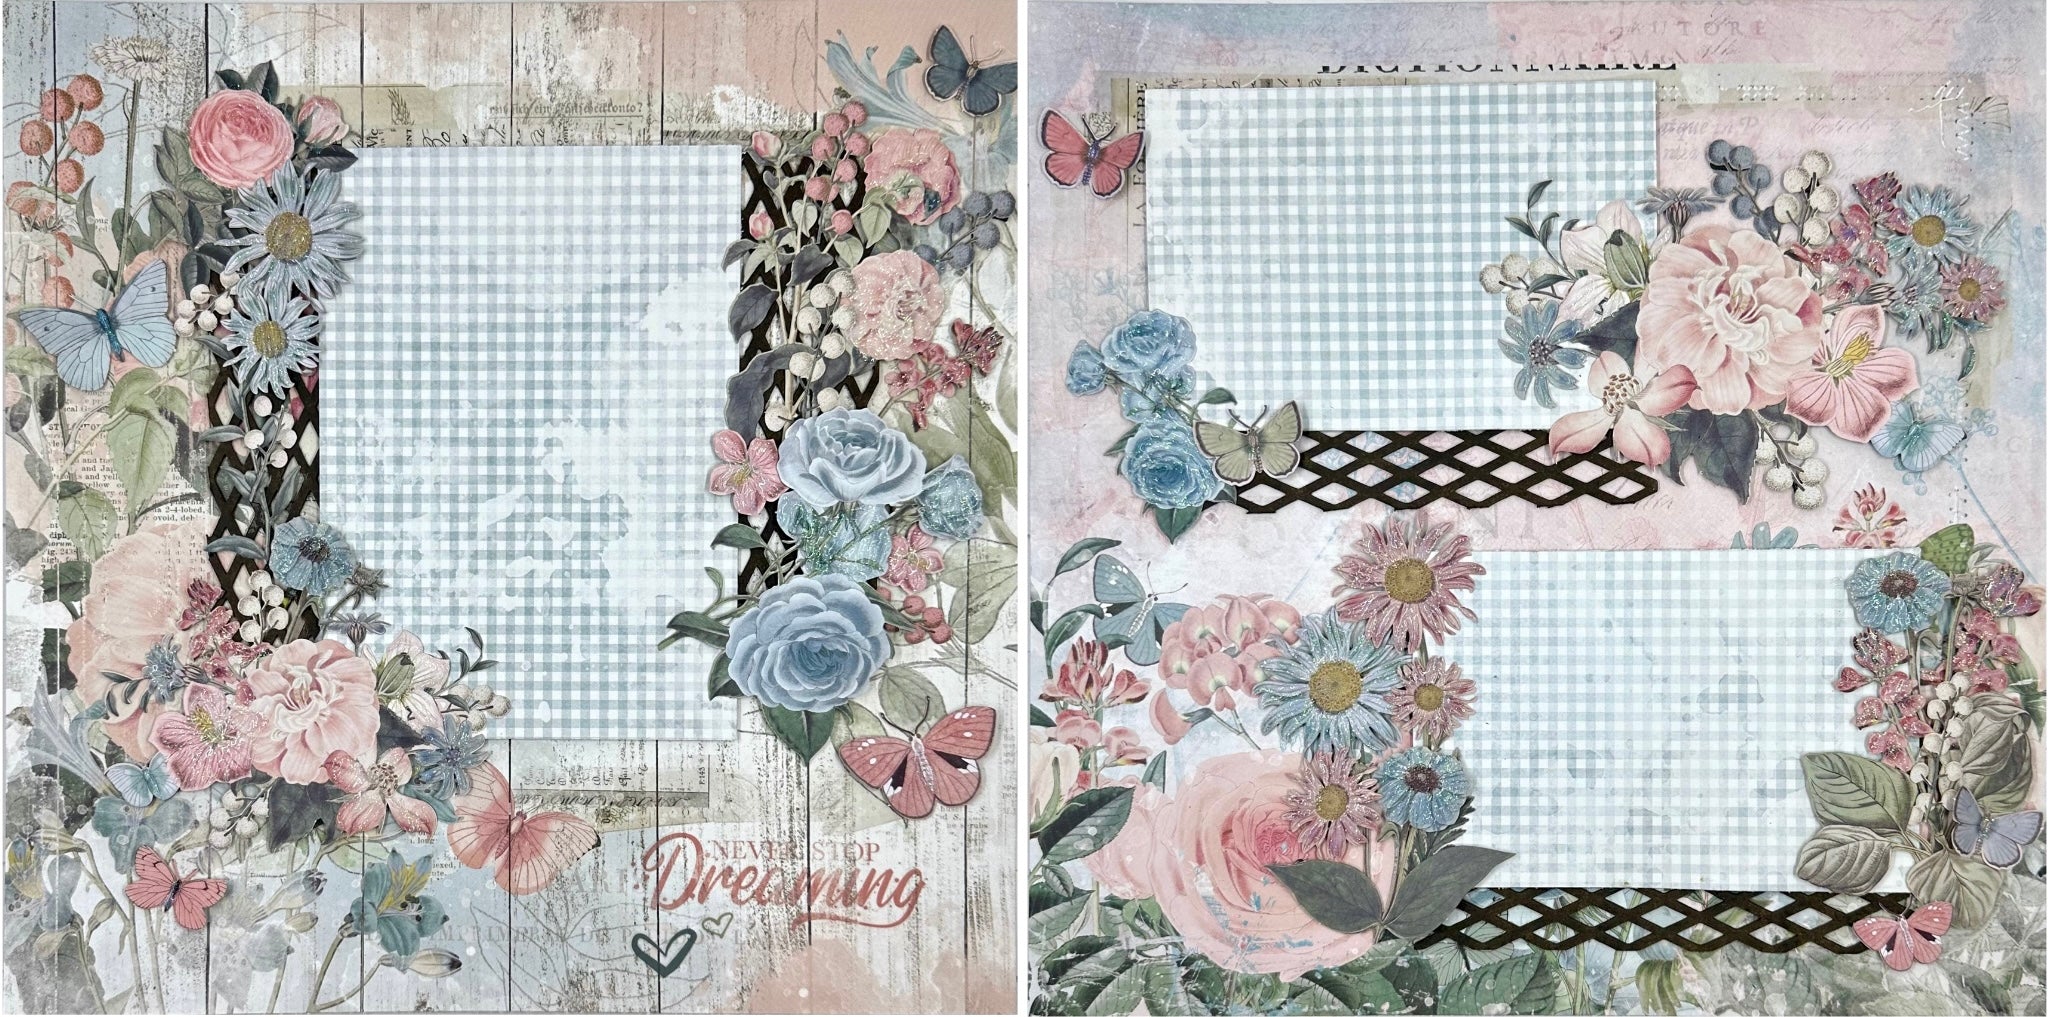 Never Stop Dreaming 2-Page Layout (Virtual Class 82)